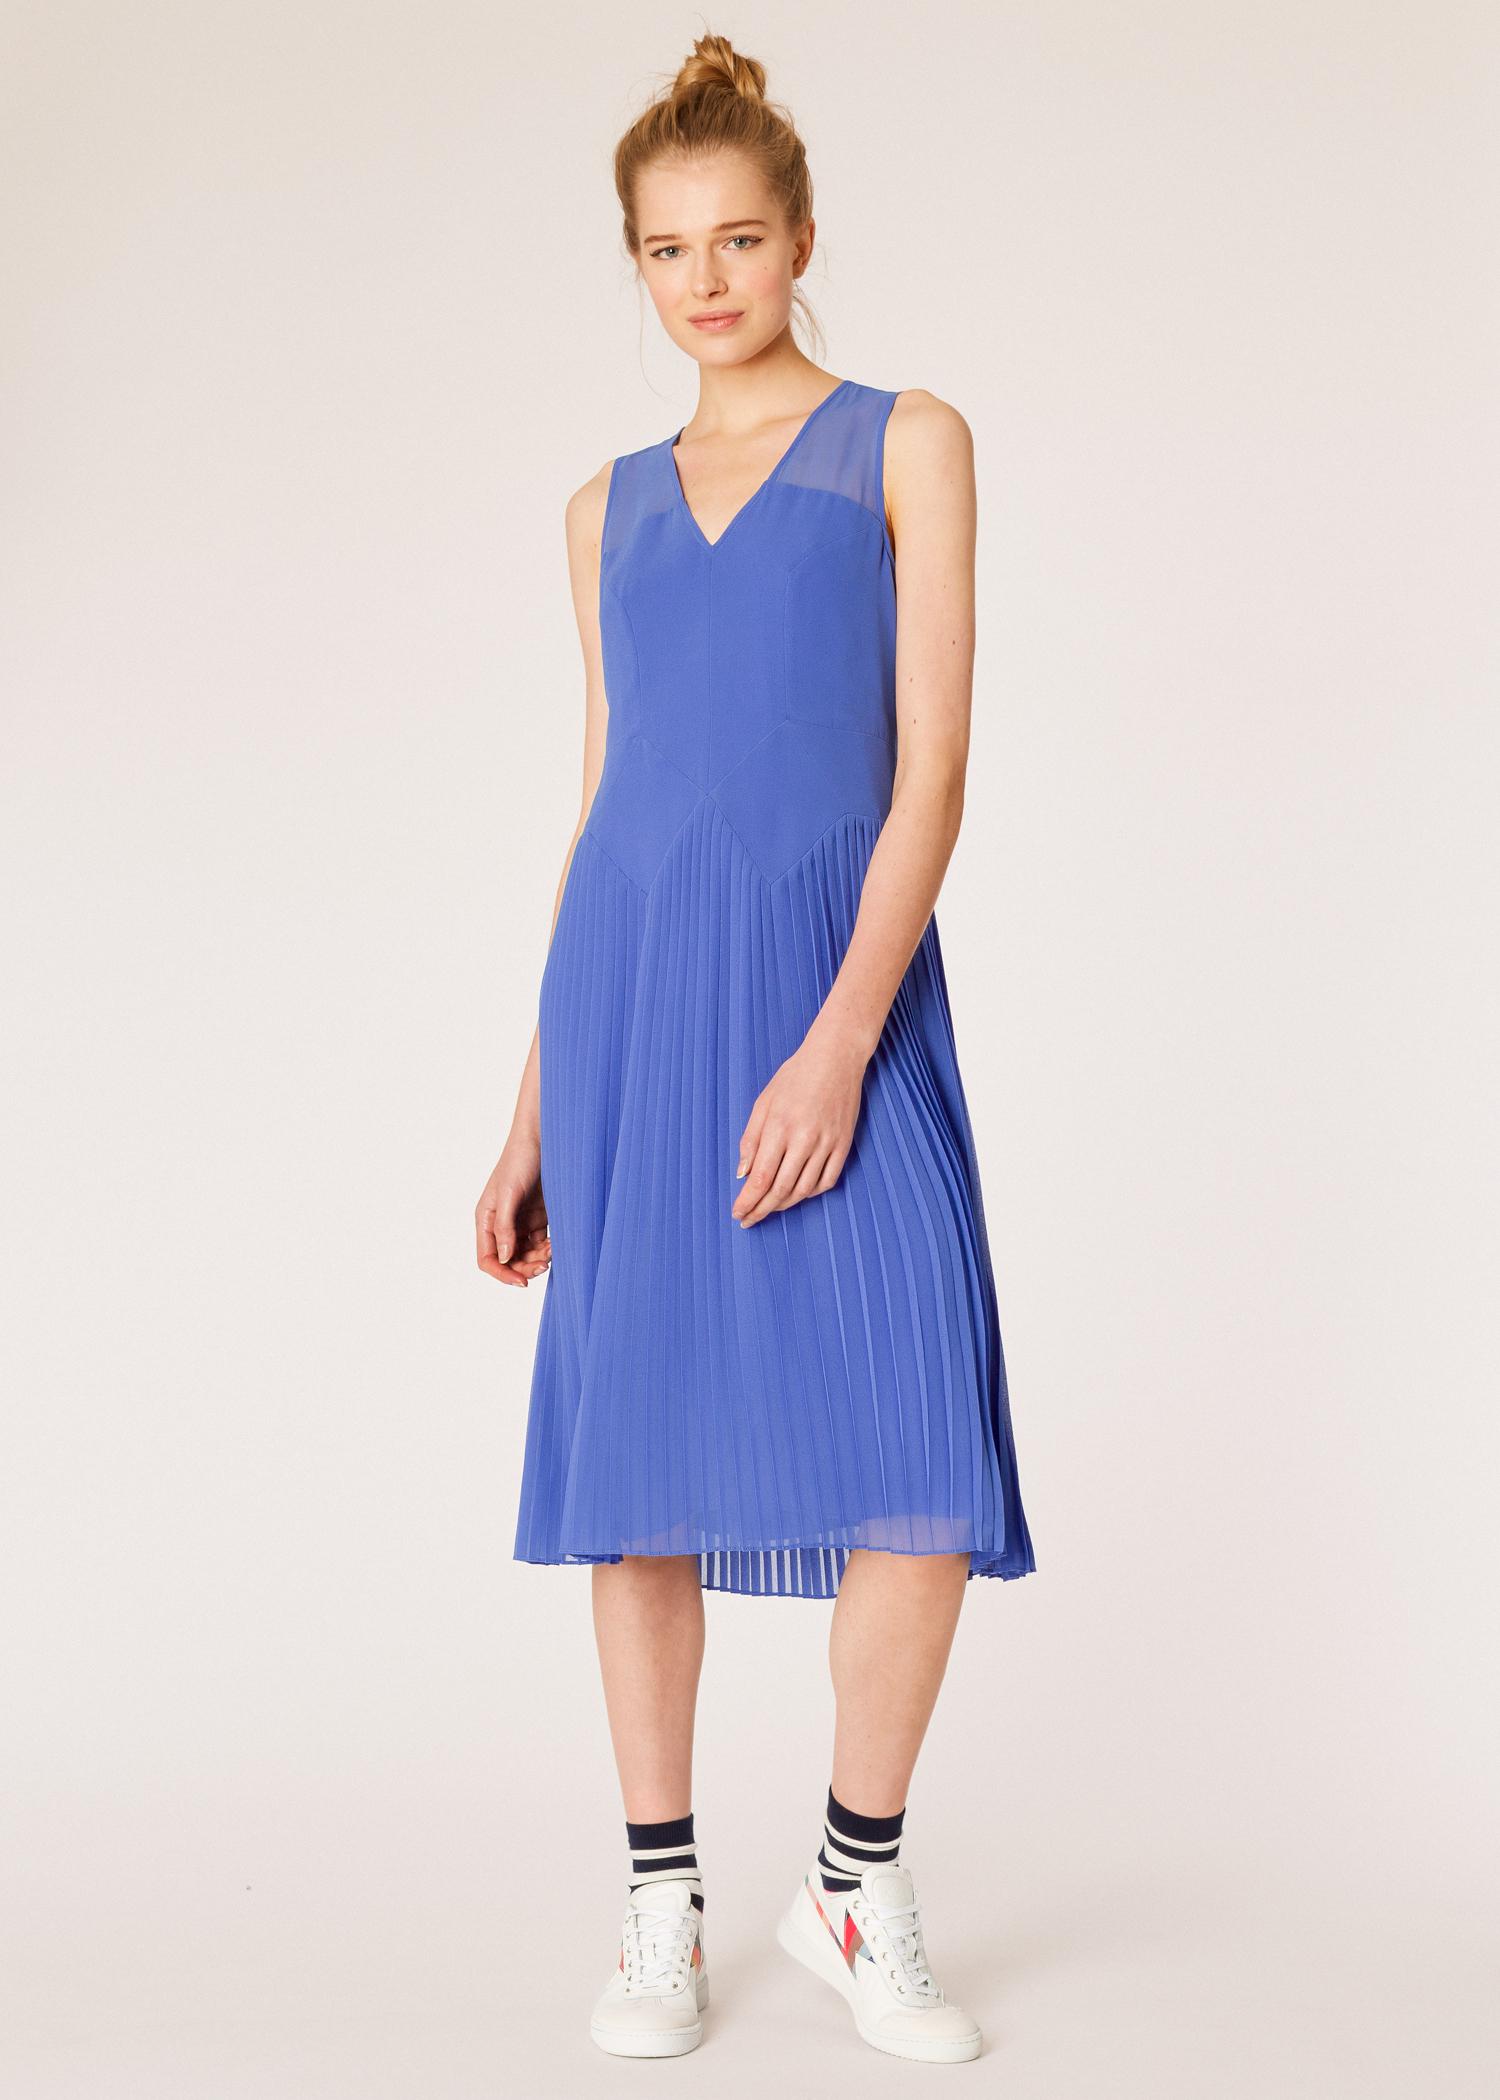 Paul Smith Synthetic Lavender Pleated Sleeveless Midi Dress in Blue - Lyst